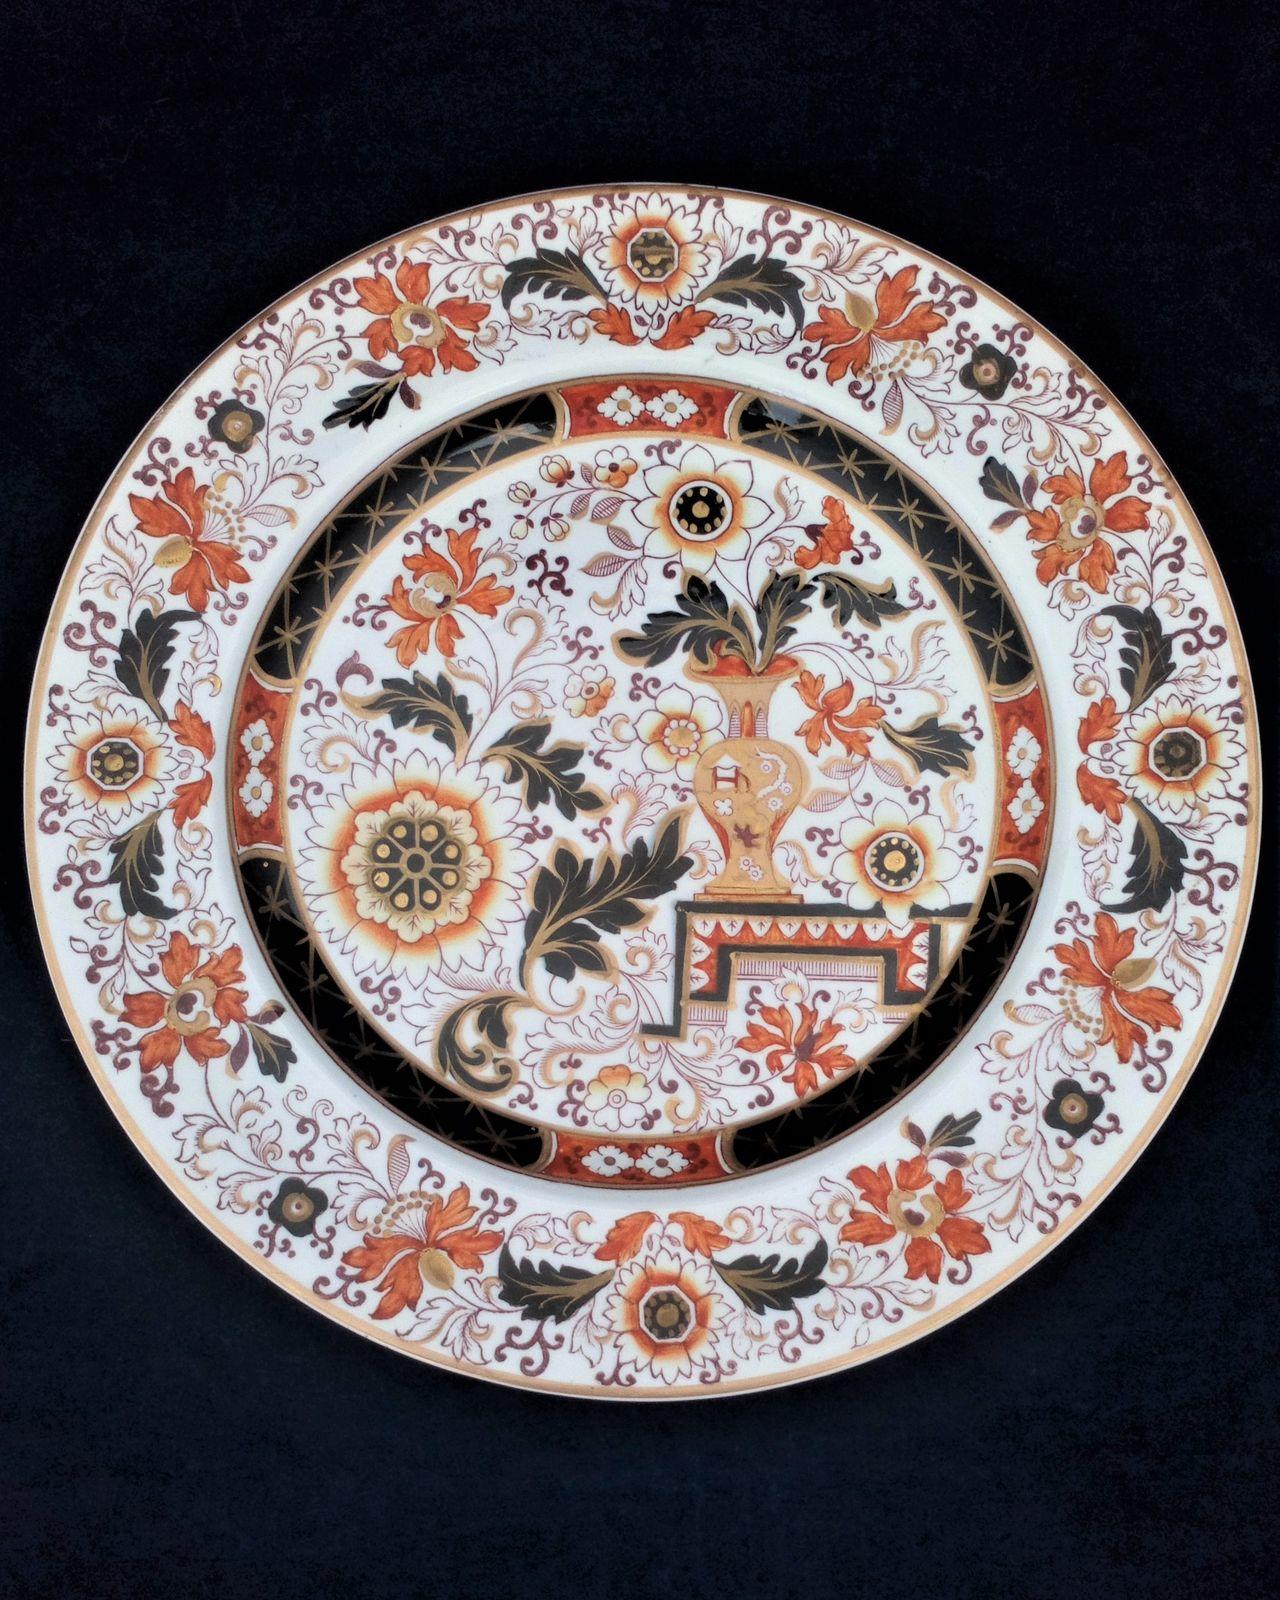 An antique Ashworth's real ironstone china dinner plate transfer prined and enamelled in the "Old Japan Vase" or Rayner pattern marked B3194 to the base circa 1865.